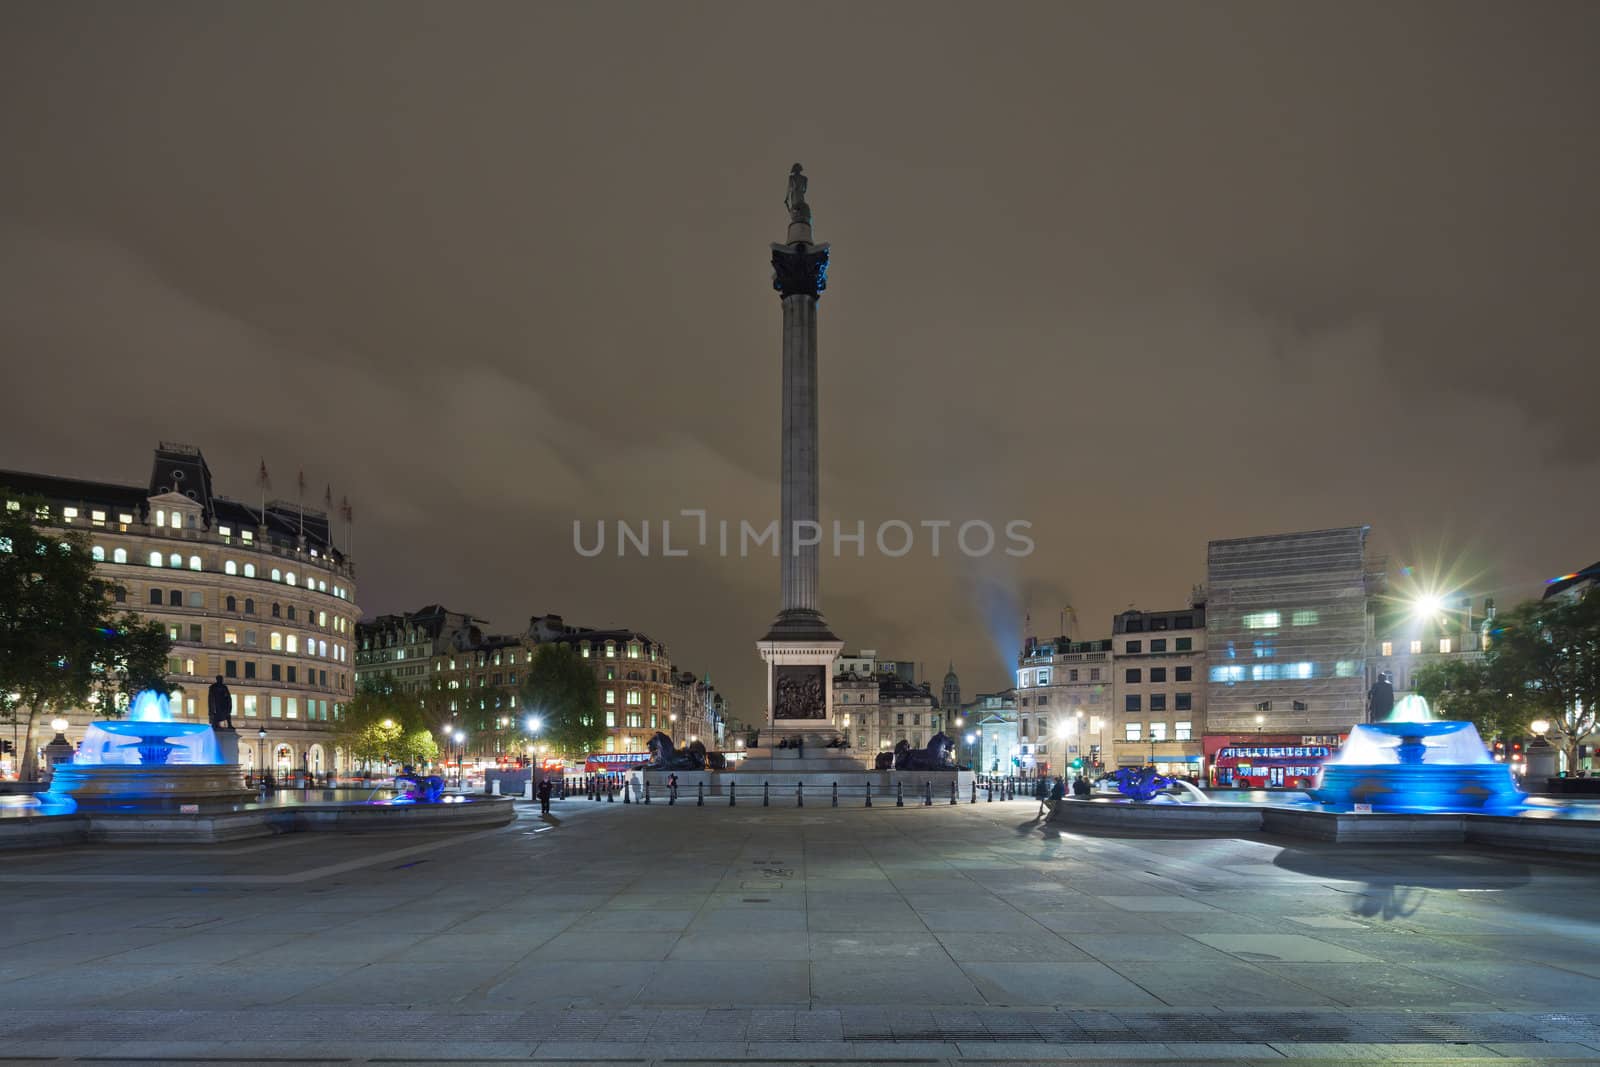 Trafalgar Square is a public space and tourist attraction in central London. Photograph shooting at night with a tripod and the tilt-shift lens, vertical lines of architecture preserved